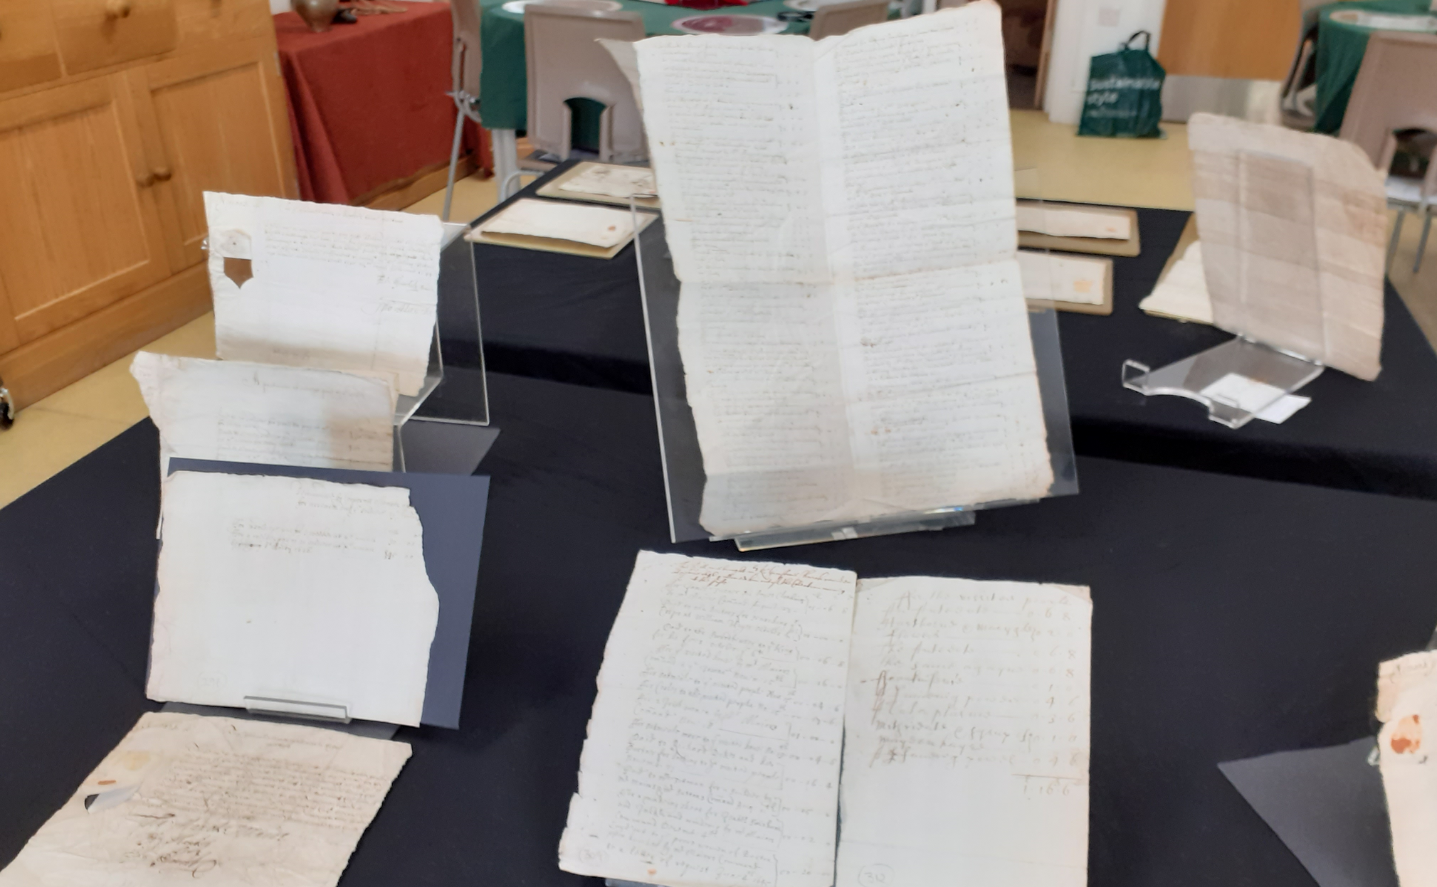 Archival material on display